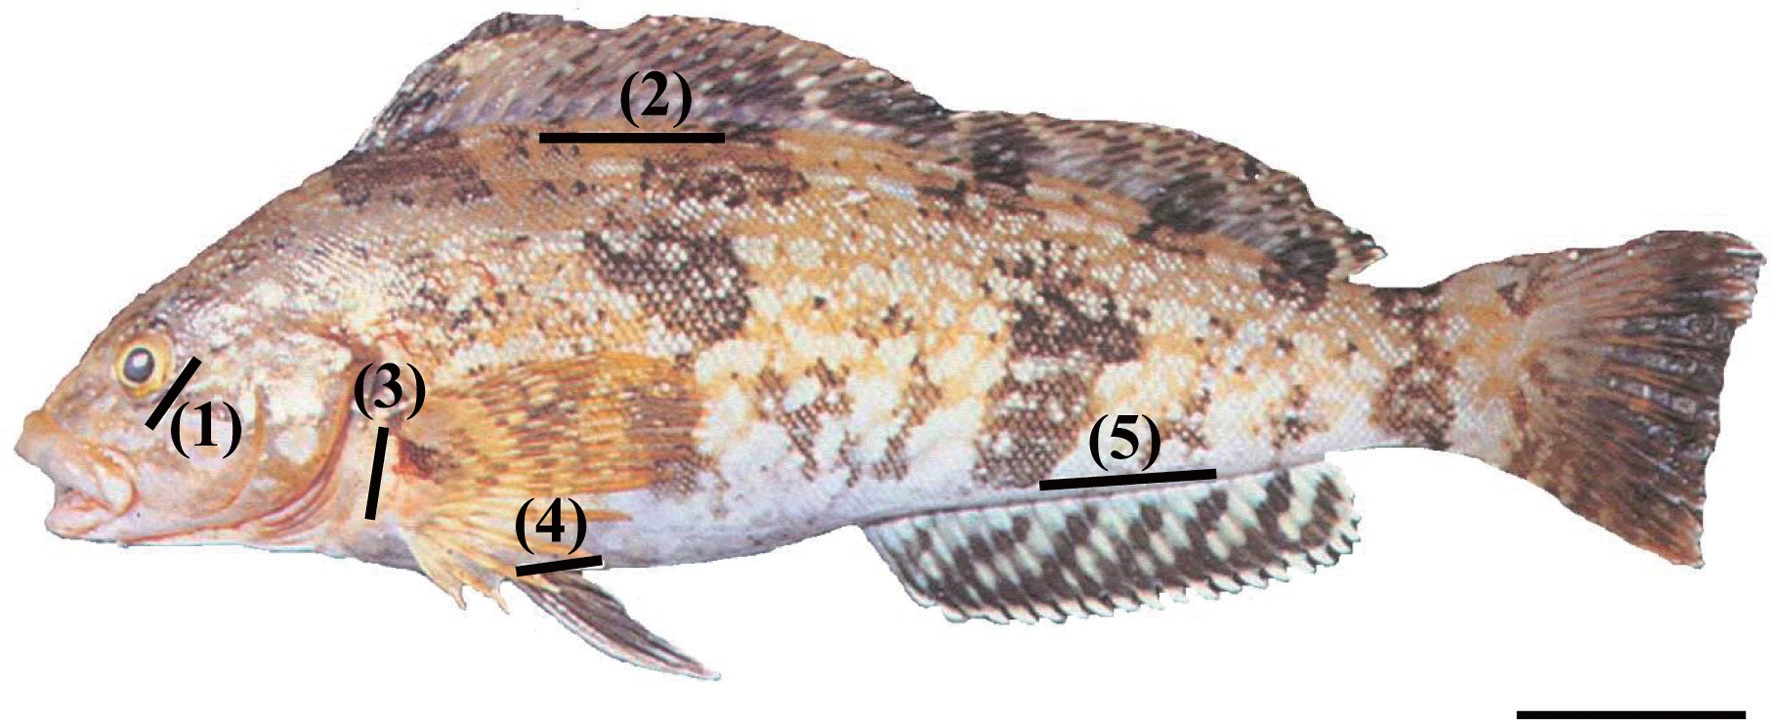 Elastomer injection locations shown on the greenling Hexagrammos otakii: 1) the adipose eyelid, 2) the surface of the dorsal fin base, 3) the inside surface of the pectoral fin base, 4) the inside surface of the pelvic fin base, and 5) the surface of the anal fin base. Scale bar = 3 cm.